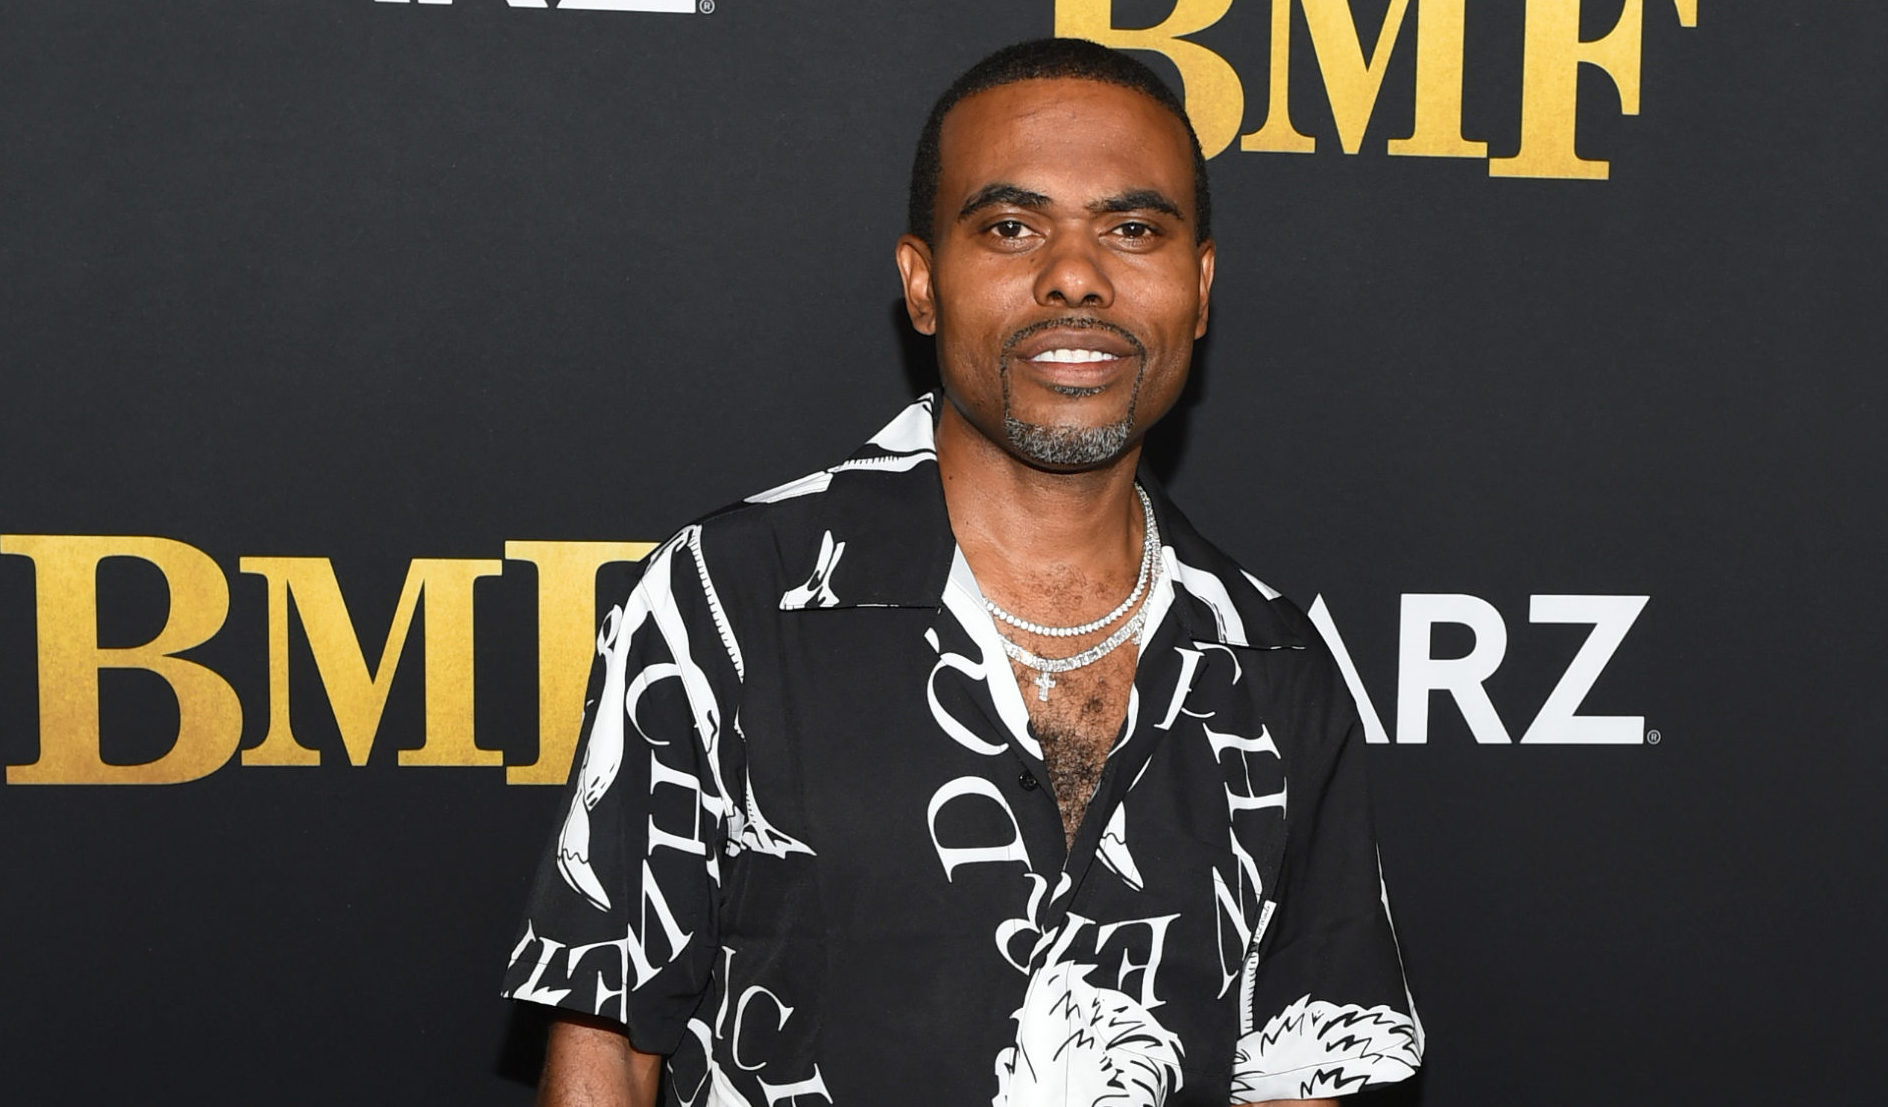 Lil Duval Encourages Celebs To Keep The Same Energy With Street And Mainstream Art thumbnail